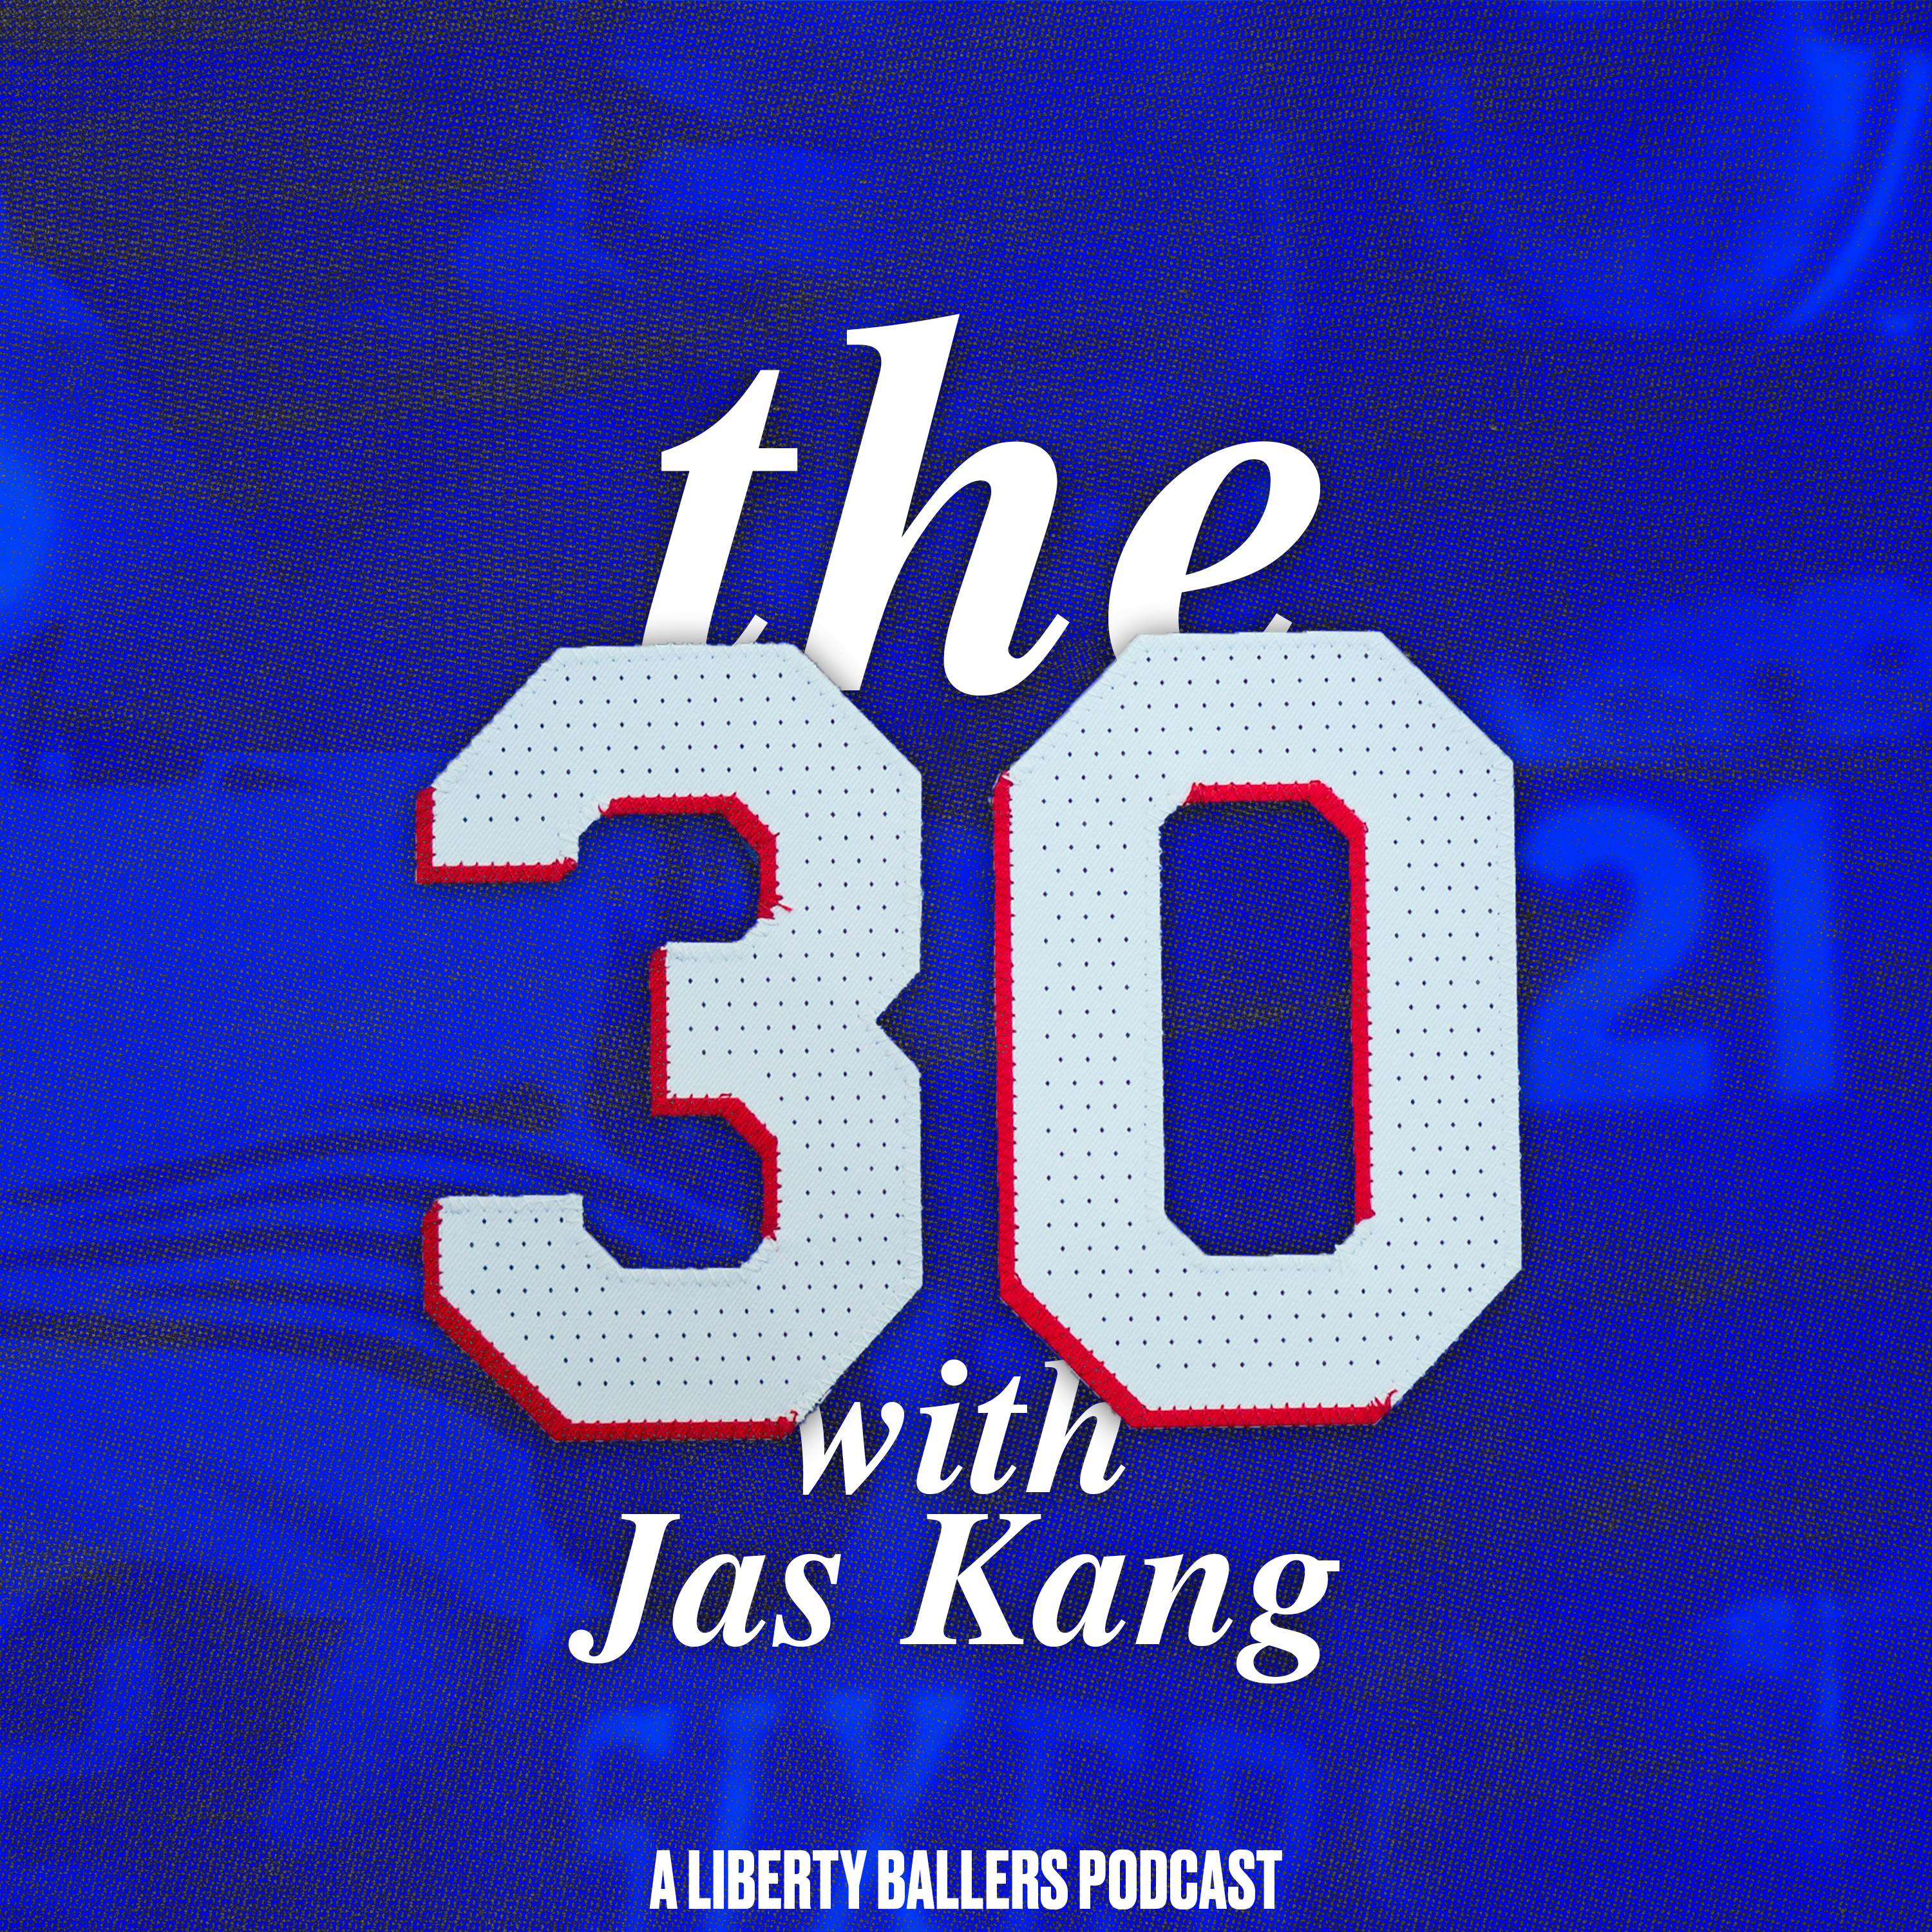 James Harden's minutes, Joel Embiid's dominance, plus too much scoring in the NBA? The 30: With Jackson Frank.